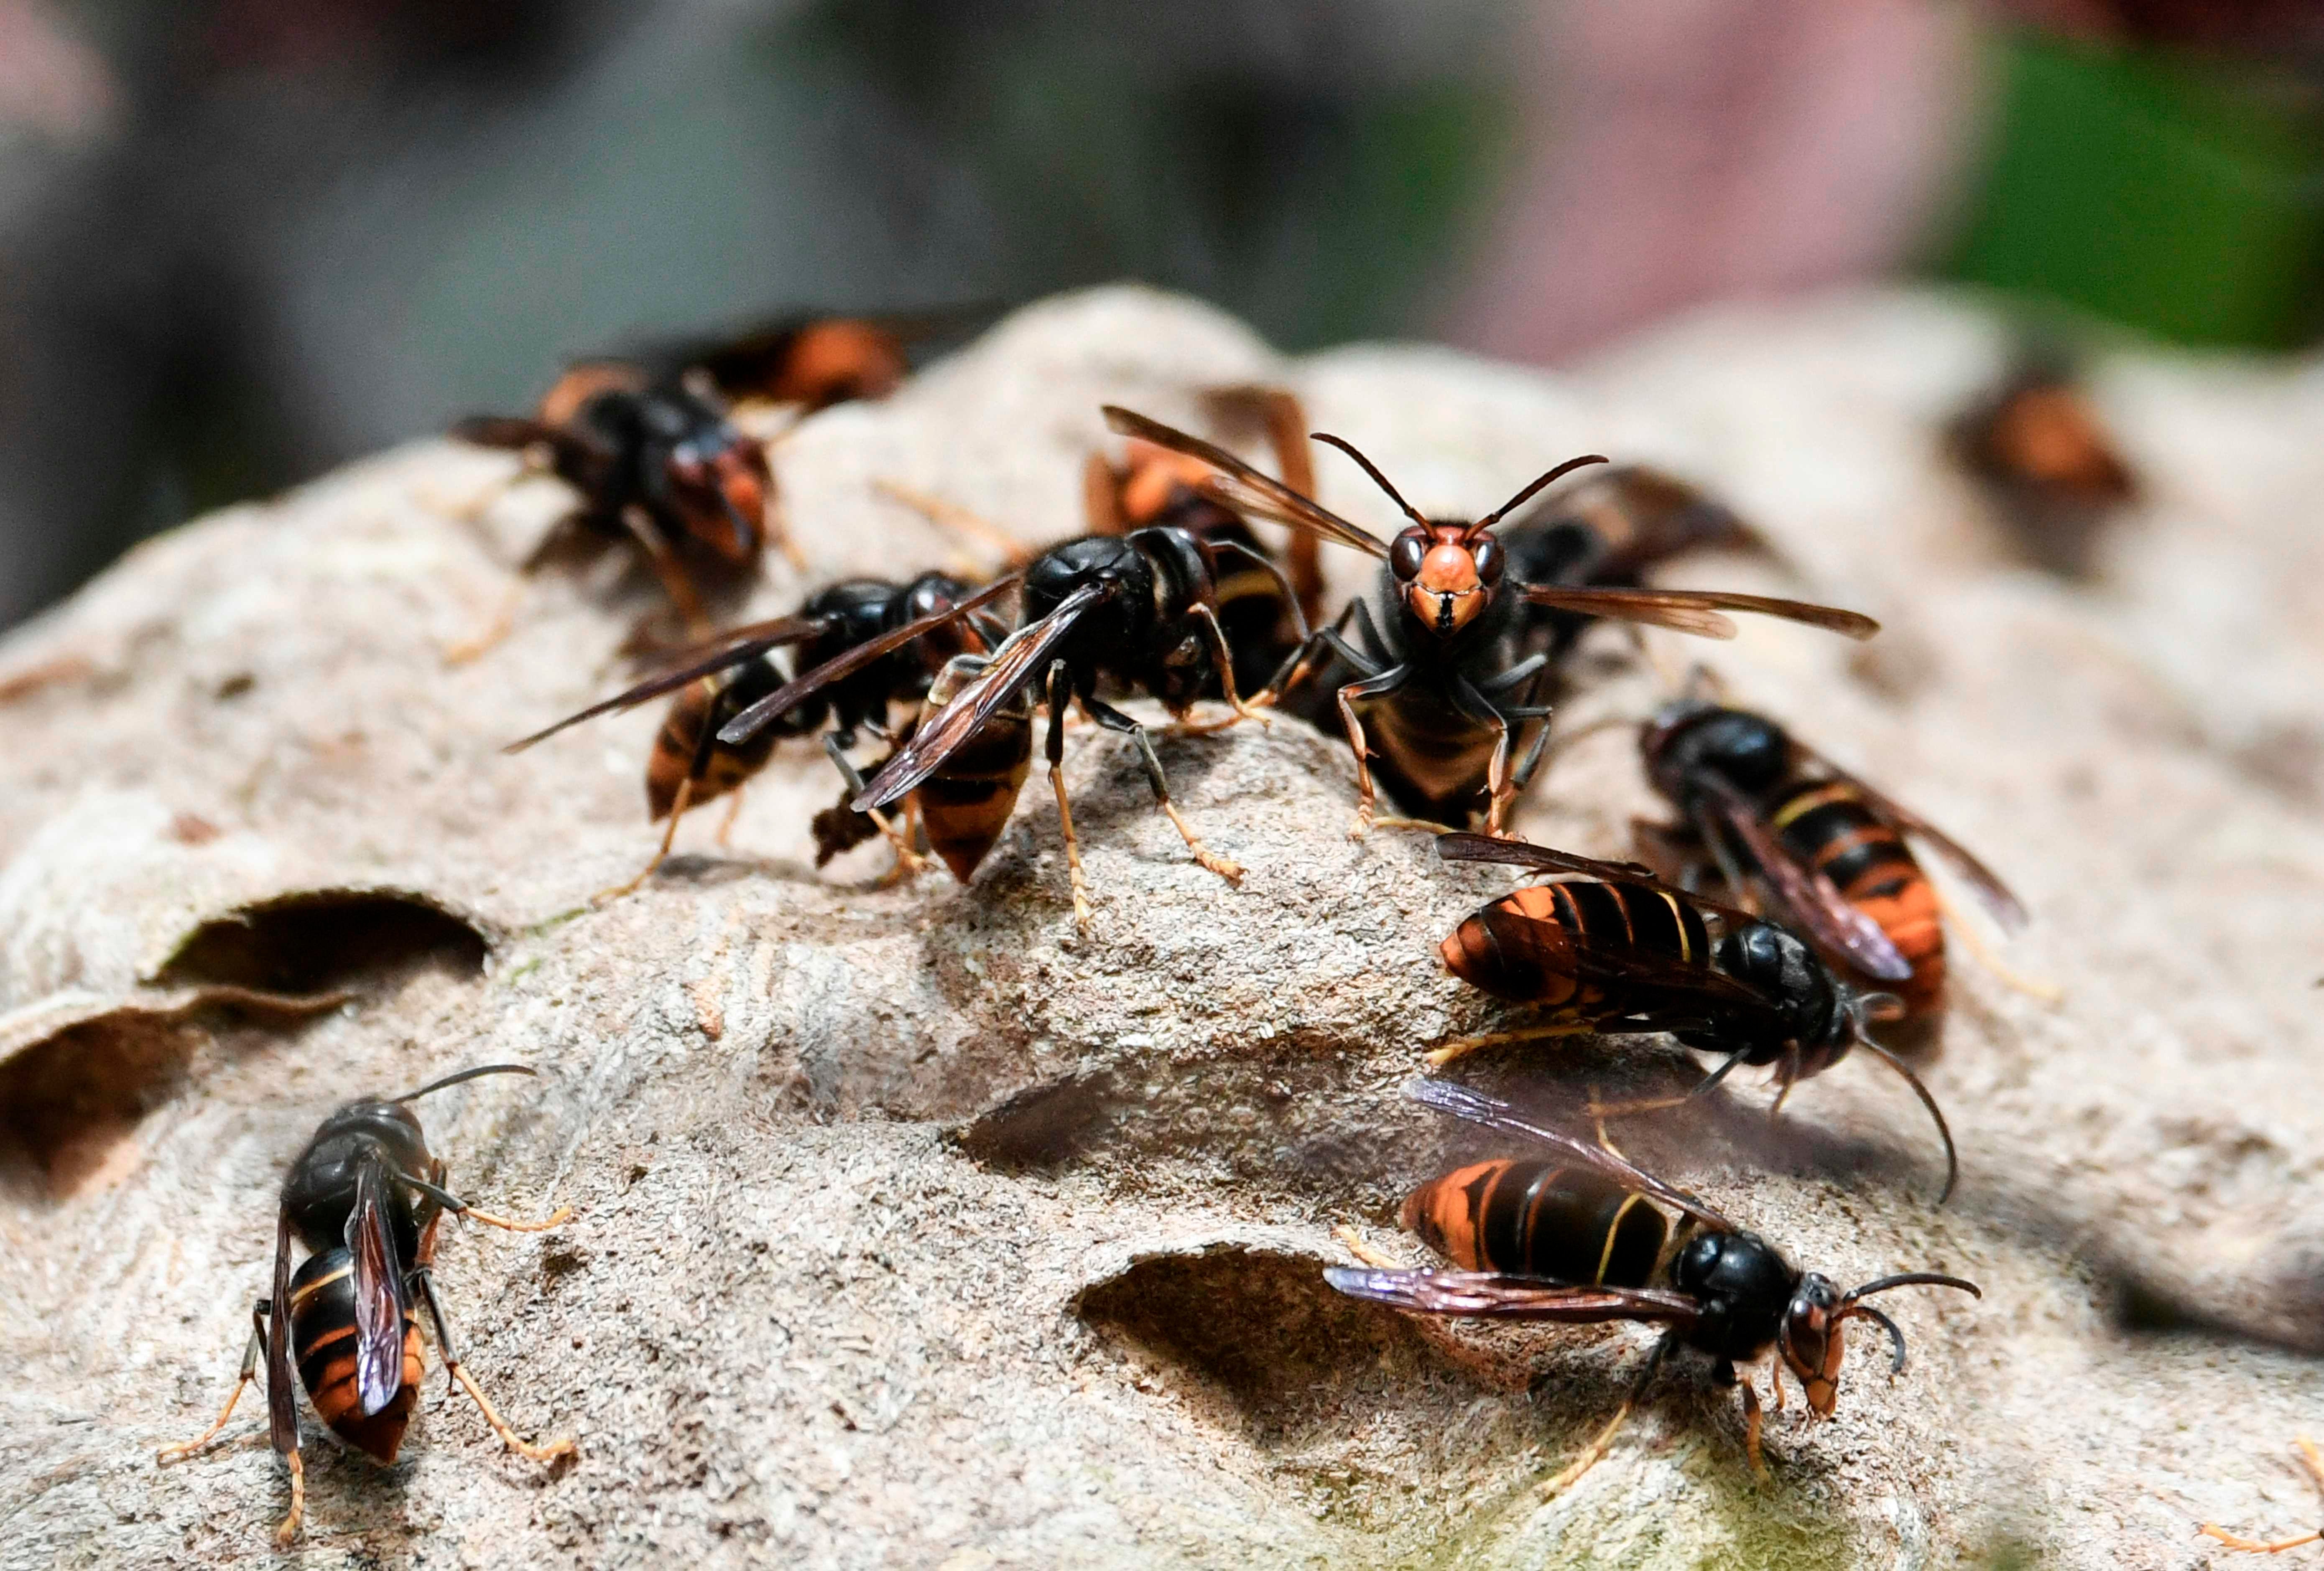 Asian hornets on their nest in Chisseaux near Tours, France